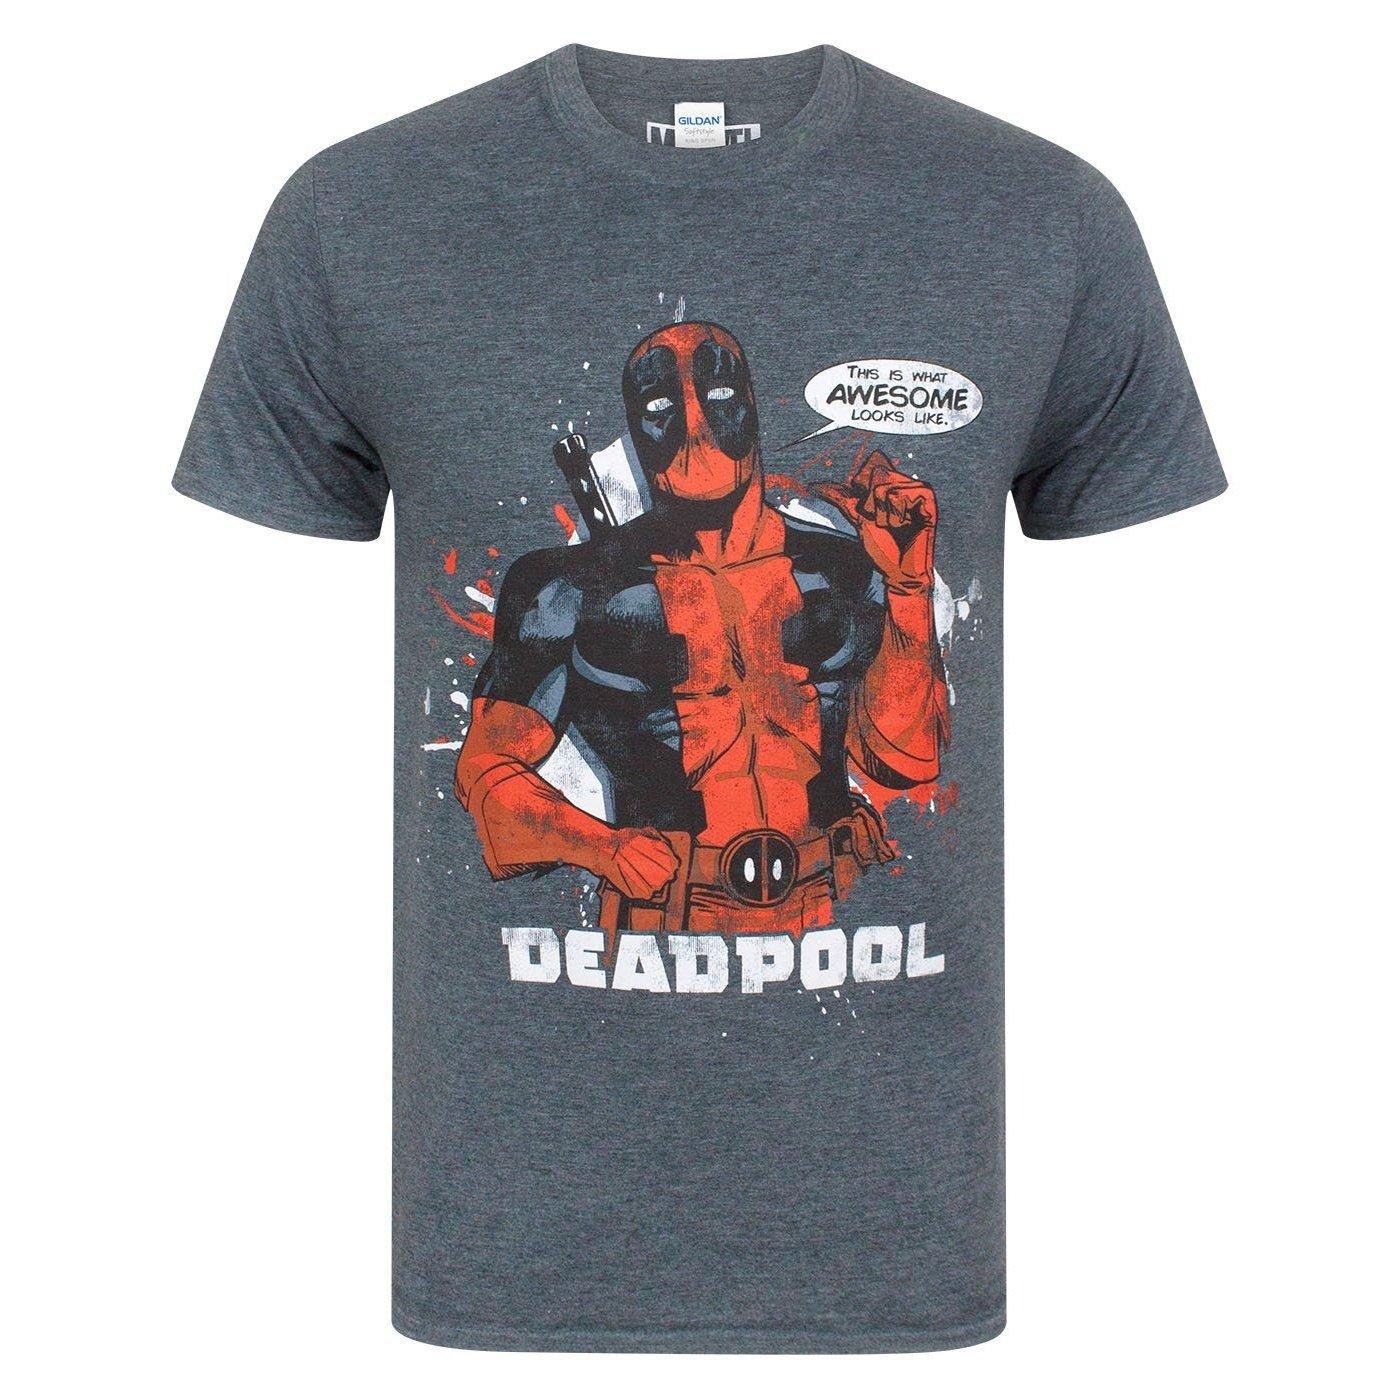 This Is What Awesome Looks Like Tshirt Herren Charcoal Black L von Deadpool